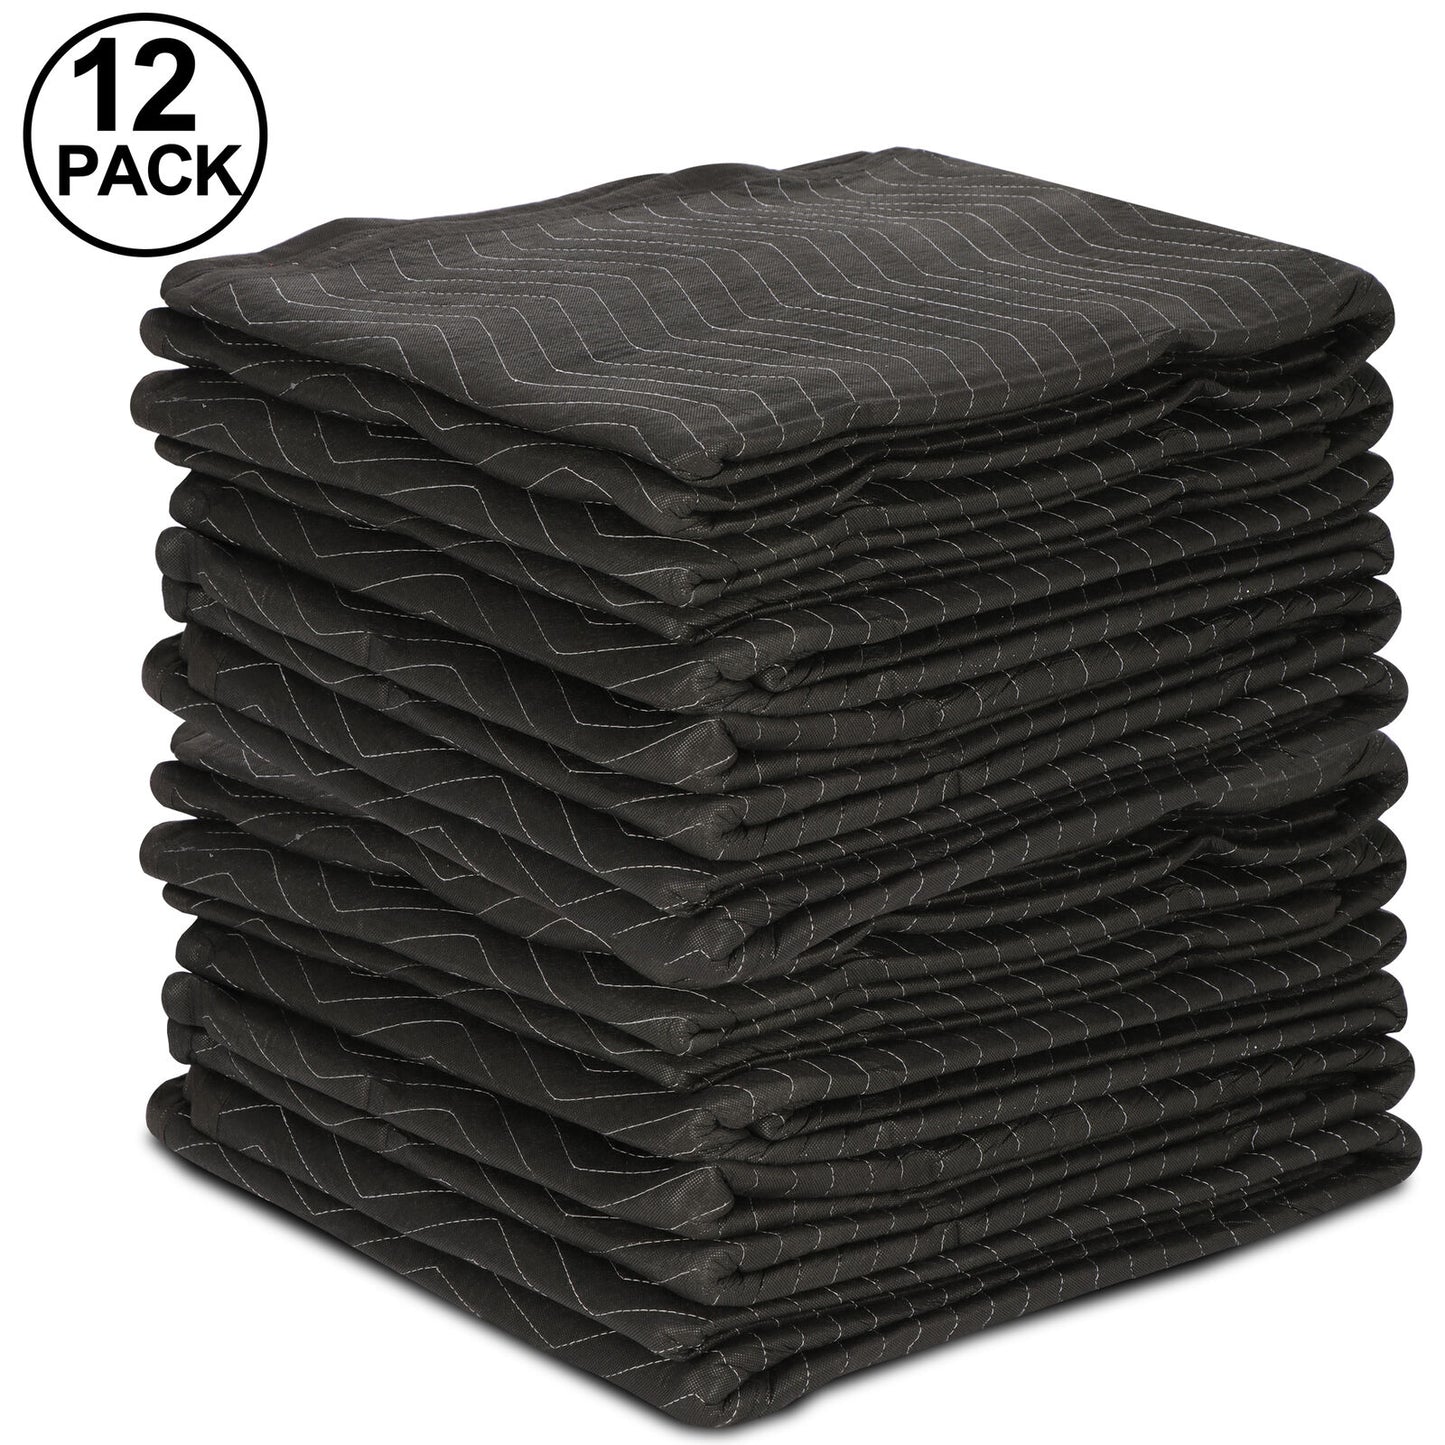 12 Pack Moving Blankets 80" x 72" Pro Economy Black Shipping Furniture Pads